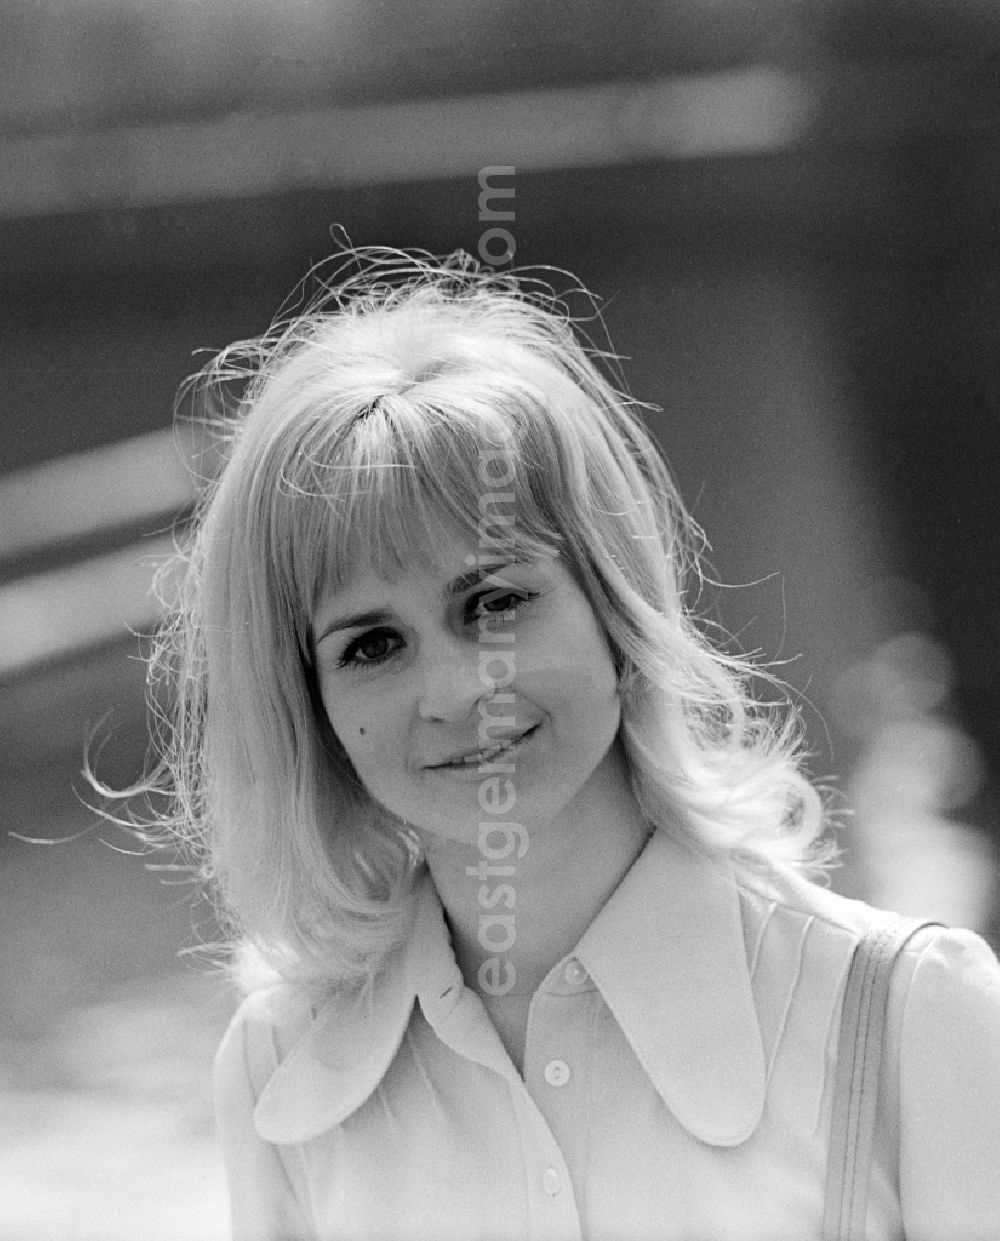 GDR image archive: Berlin - The singer Ilka Lux in Berlin, the former capital of the GDR, German Democratic Republic. Mid-7